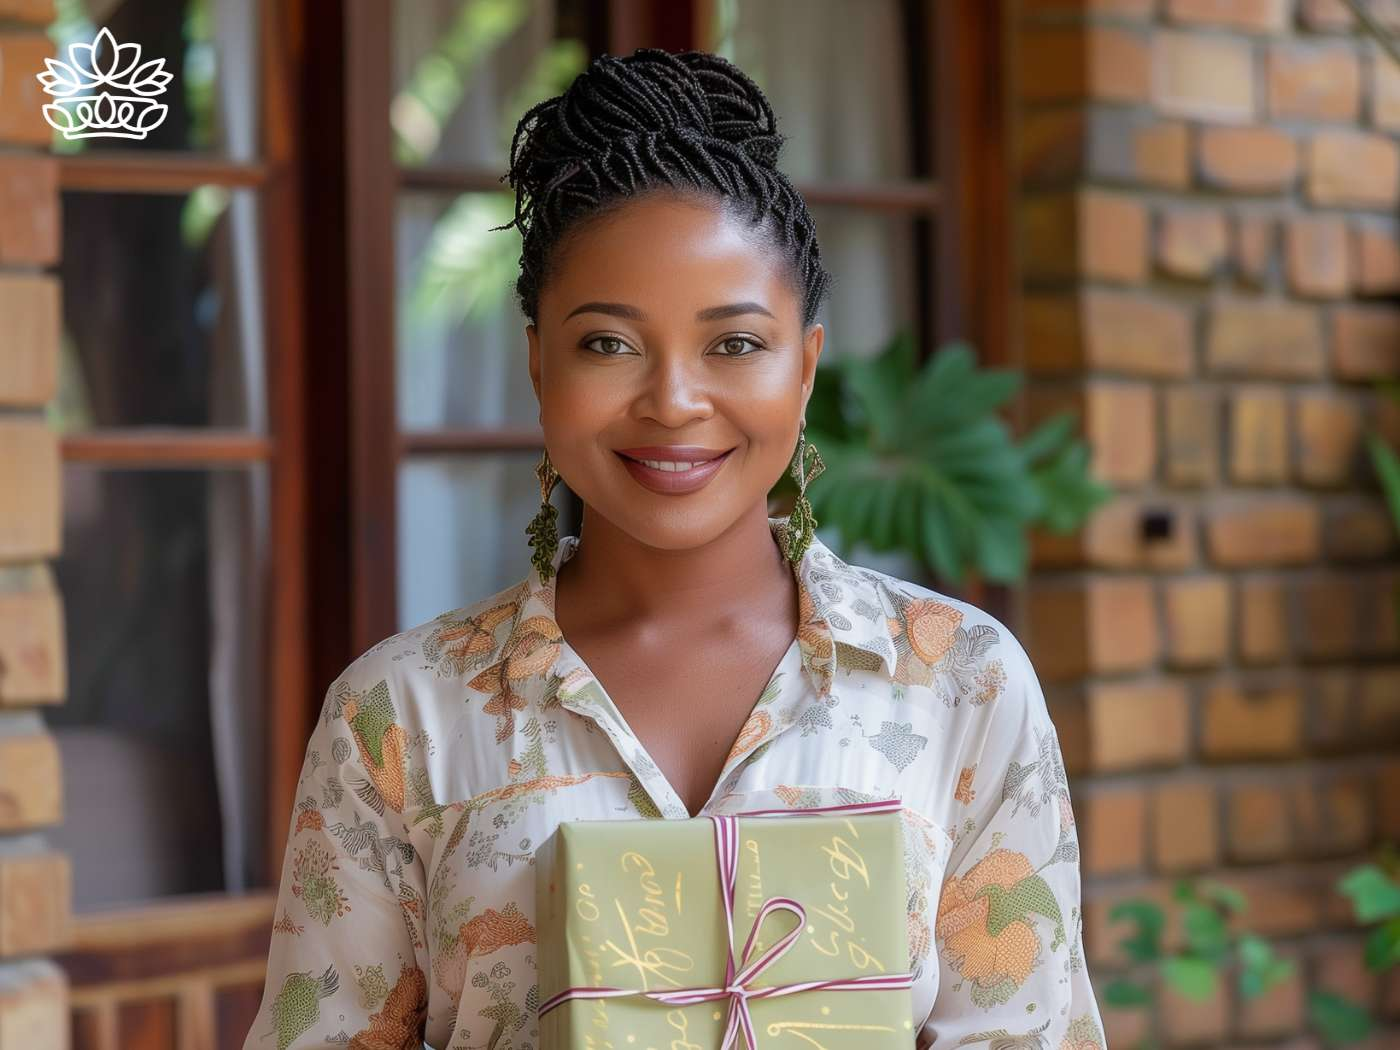 Woman smiling with a gift box, representing the Durban Gift Box Delivery Collection, ready to send hampers and flowers for a special day in Cape Town, ensuring the best service by Fabulous Flowers and Gifts.